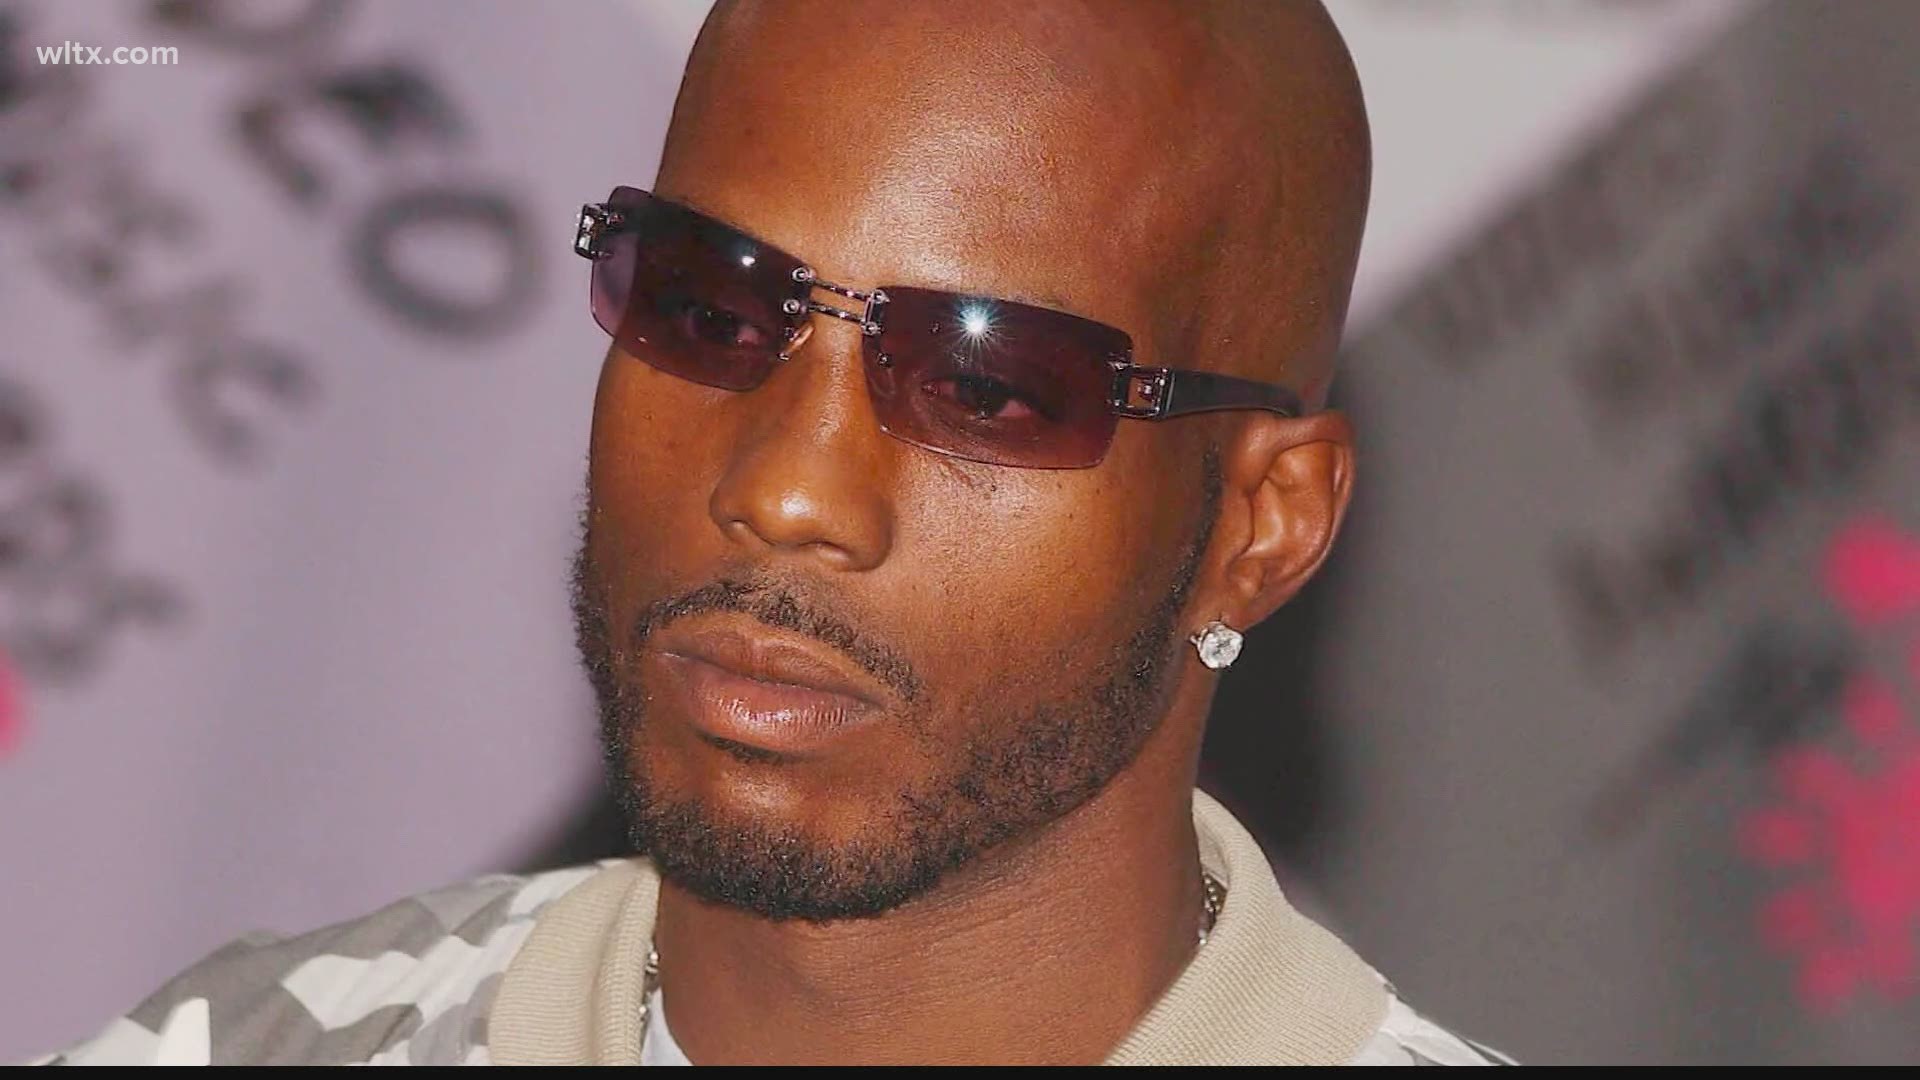 The family of rapper DMX says he has died at age 50 after a career in which he delivered iconic hip-hop songs such as “Ruff Ryders’ Anthem."